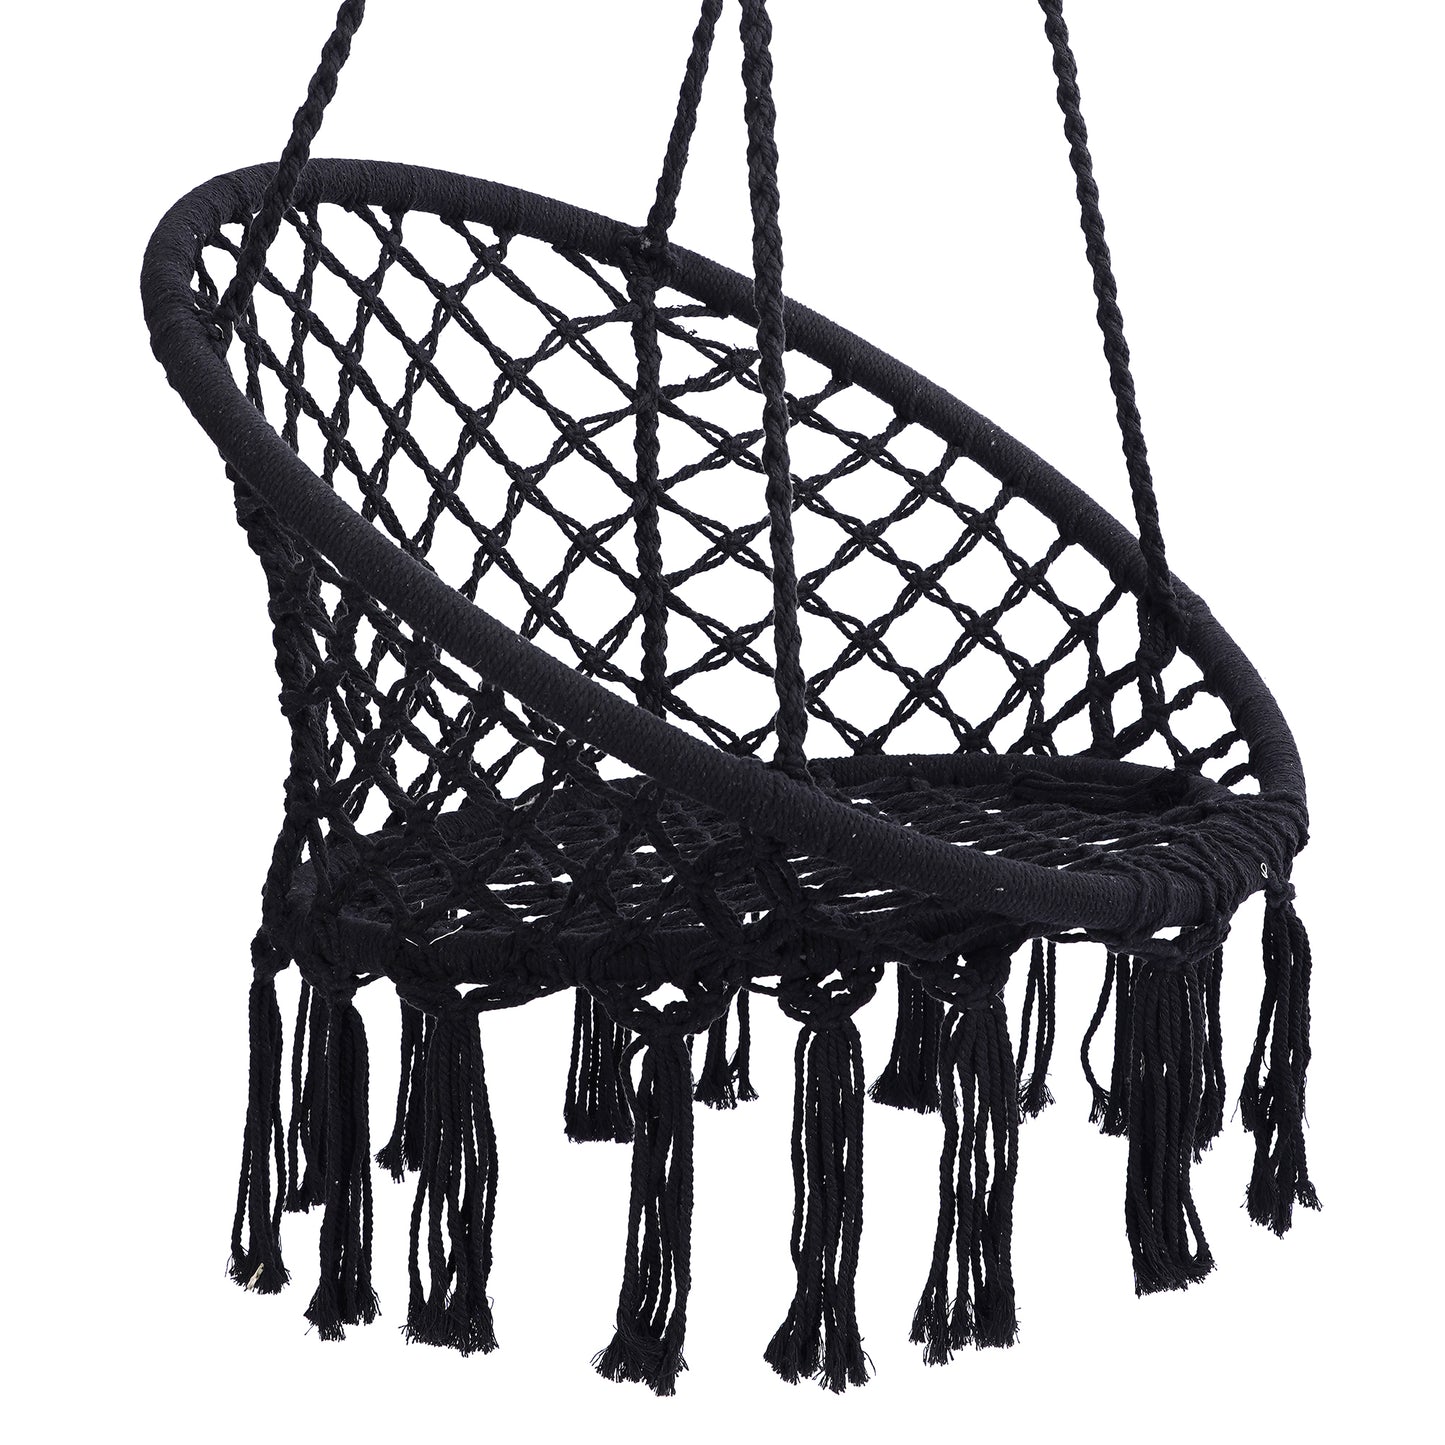 Black Swing，Hammock Chair Macrame Swing，Max 330 Lbs Hanging Cotton Rope Hammock Swing Chair for Indoor and Outdoor